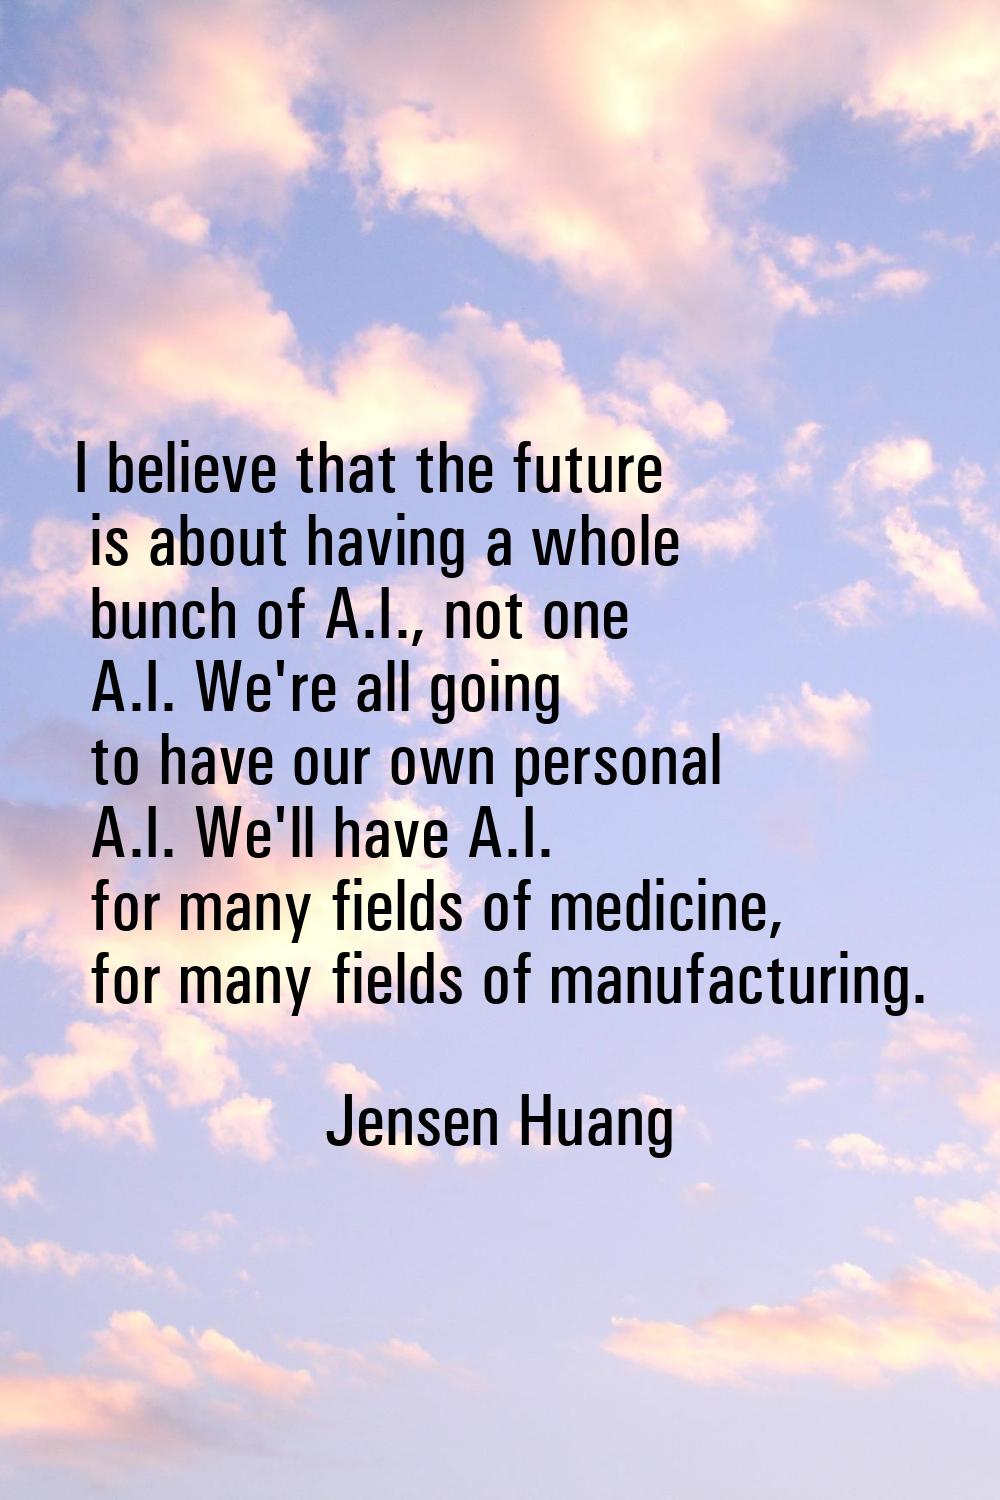 I believe that the future is about having a whole bunch of A.I., not one A.I. We're all going to ha